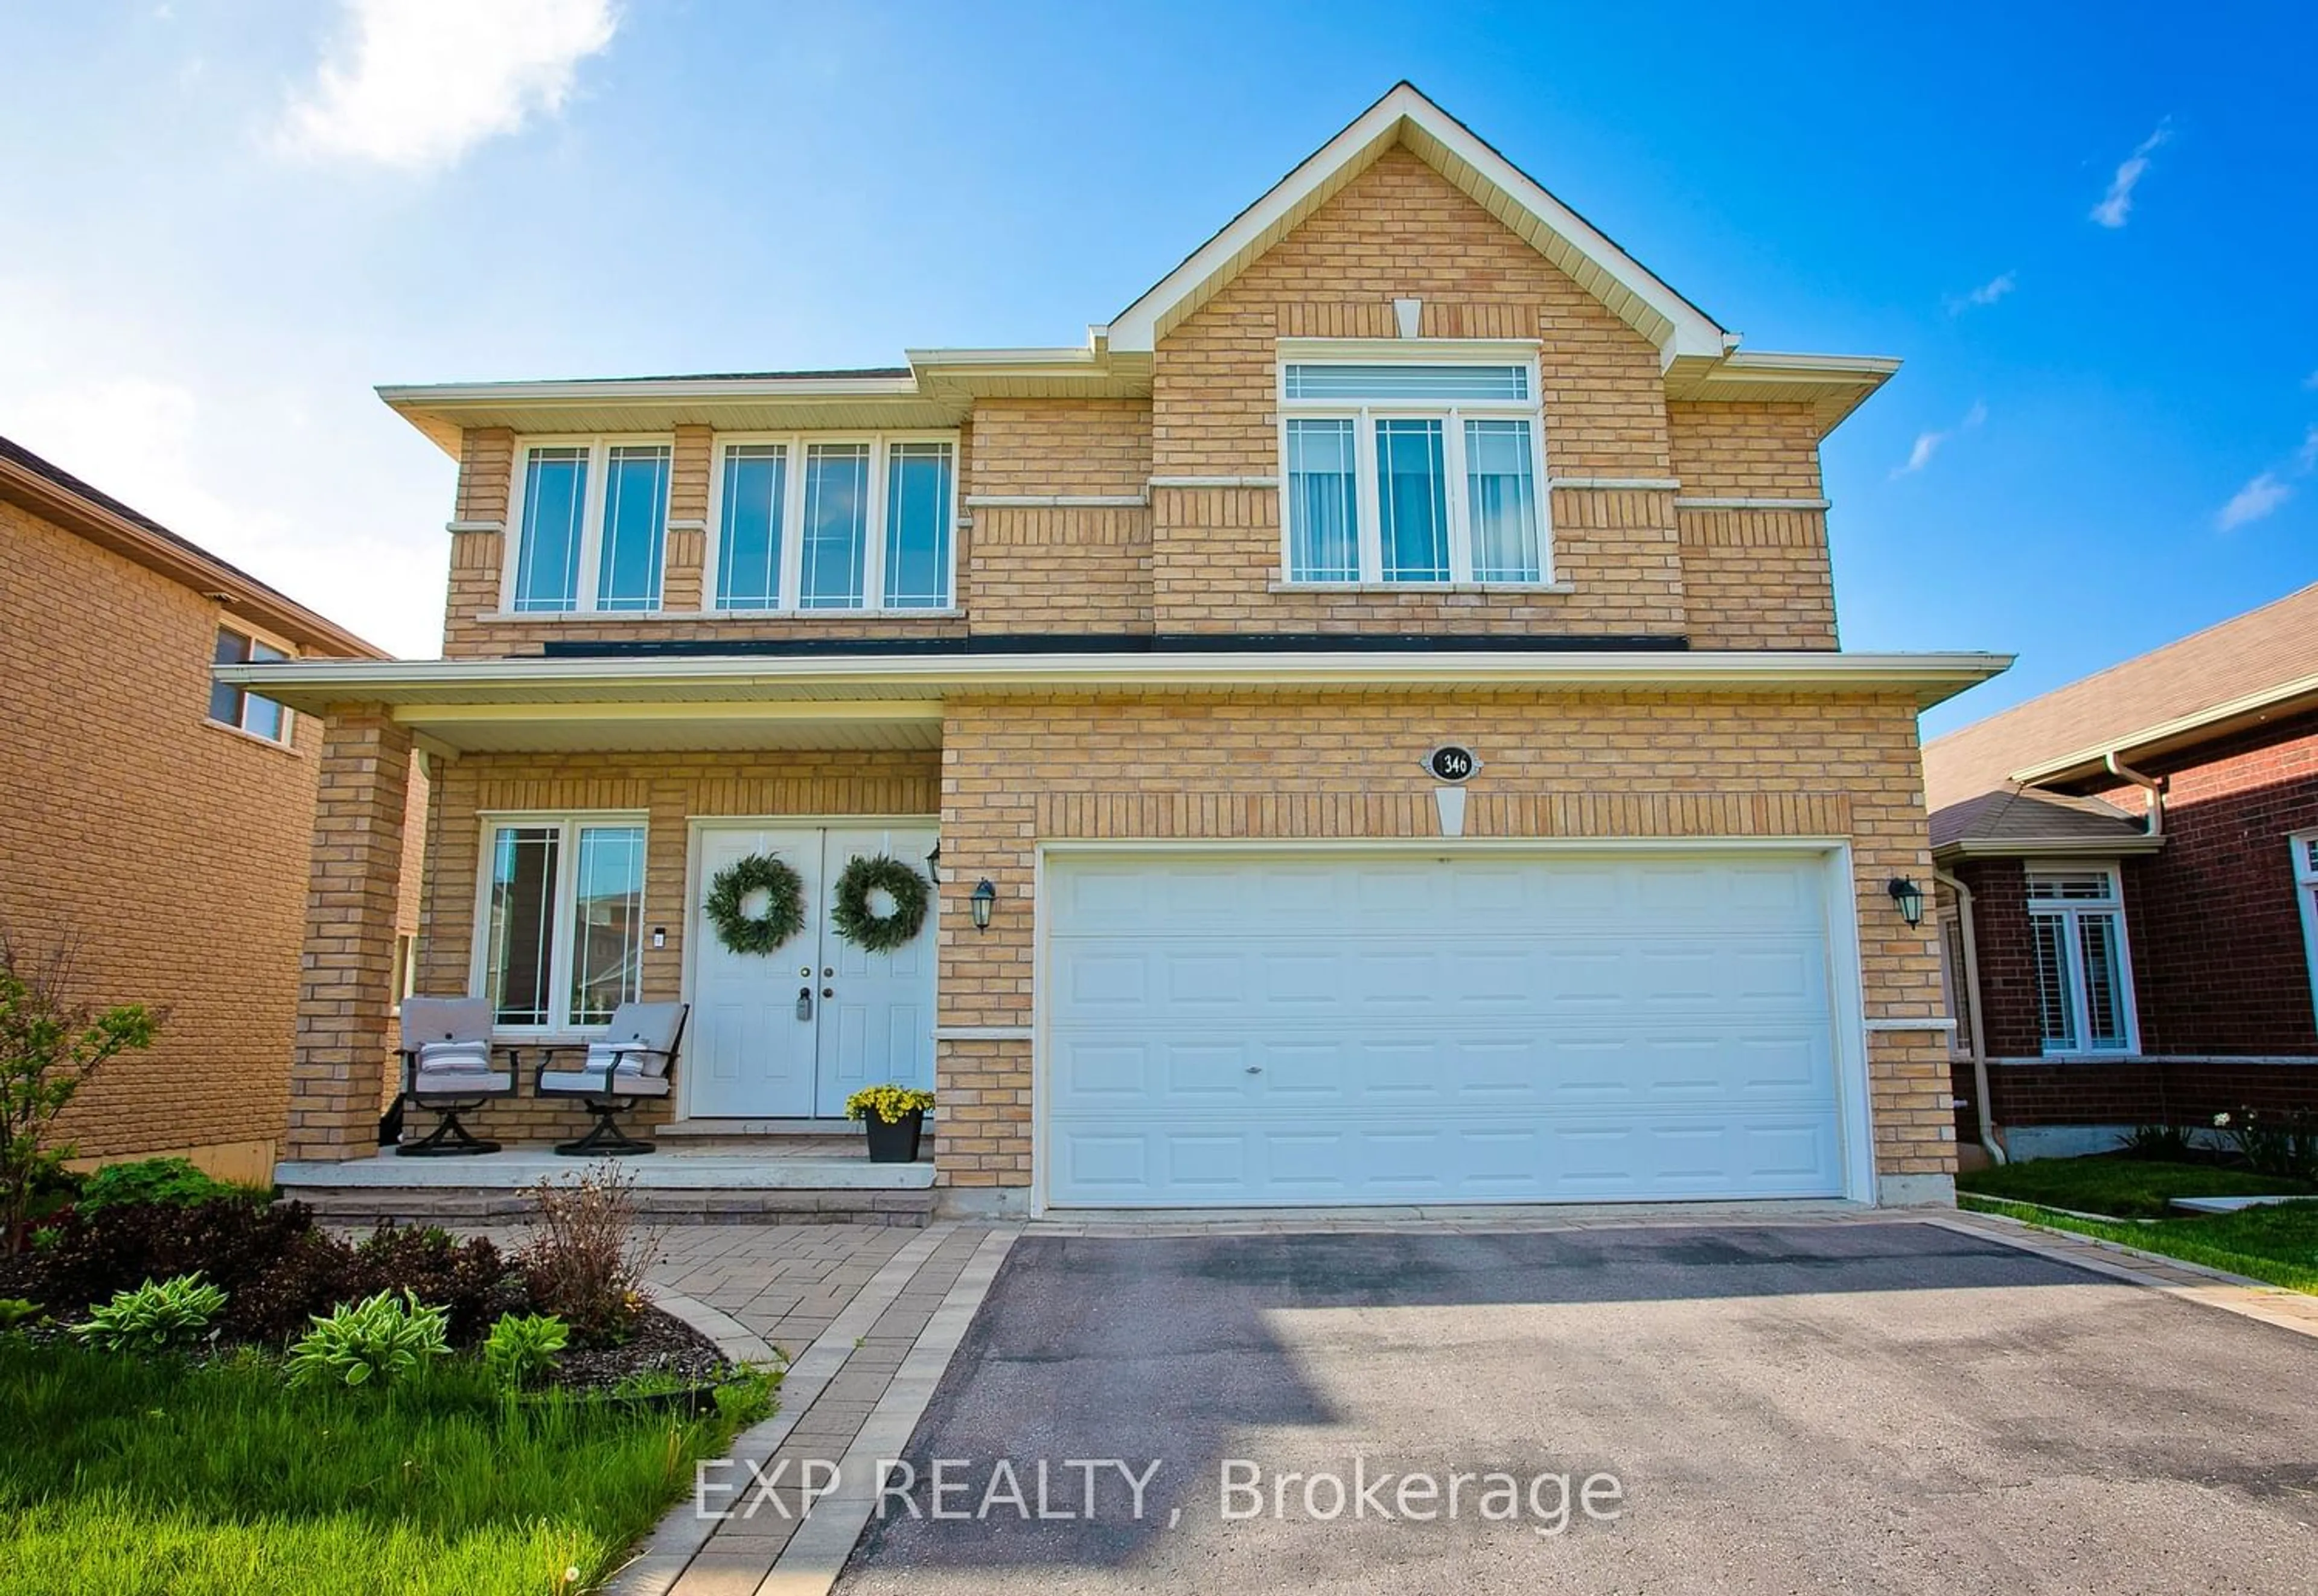 Frontside or backside of a home for 1346 Haggis Dr, Peterborough Ontario K9K 2S7